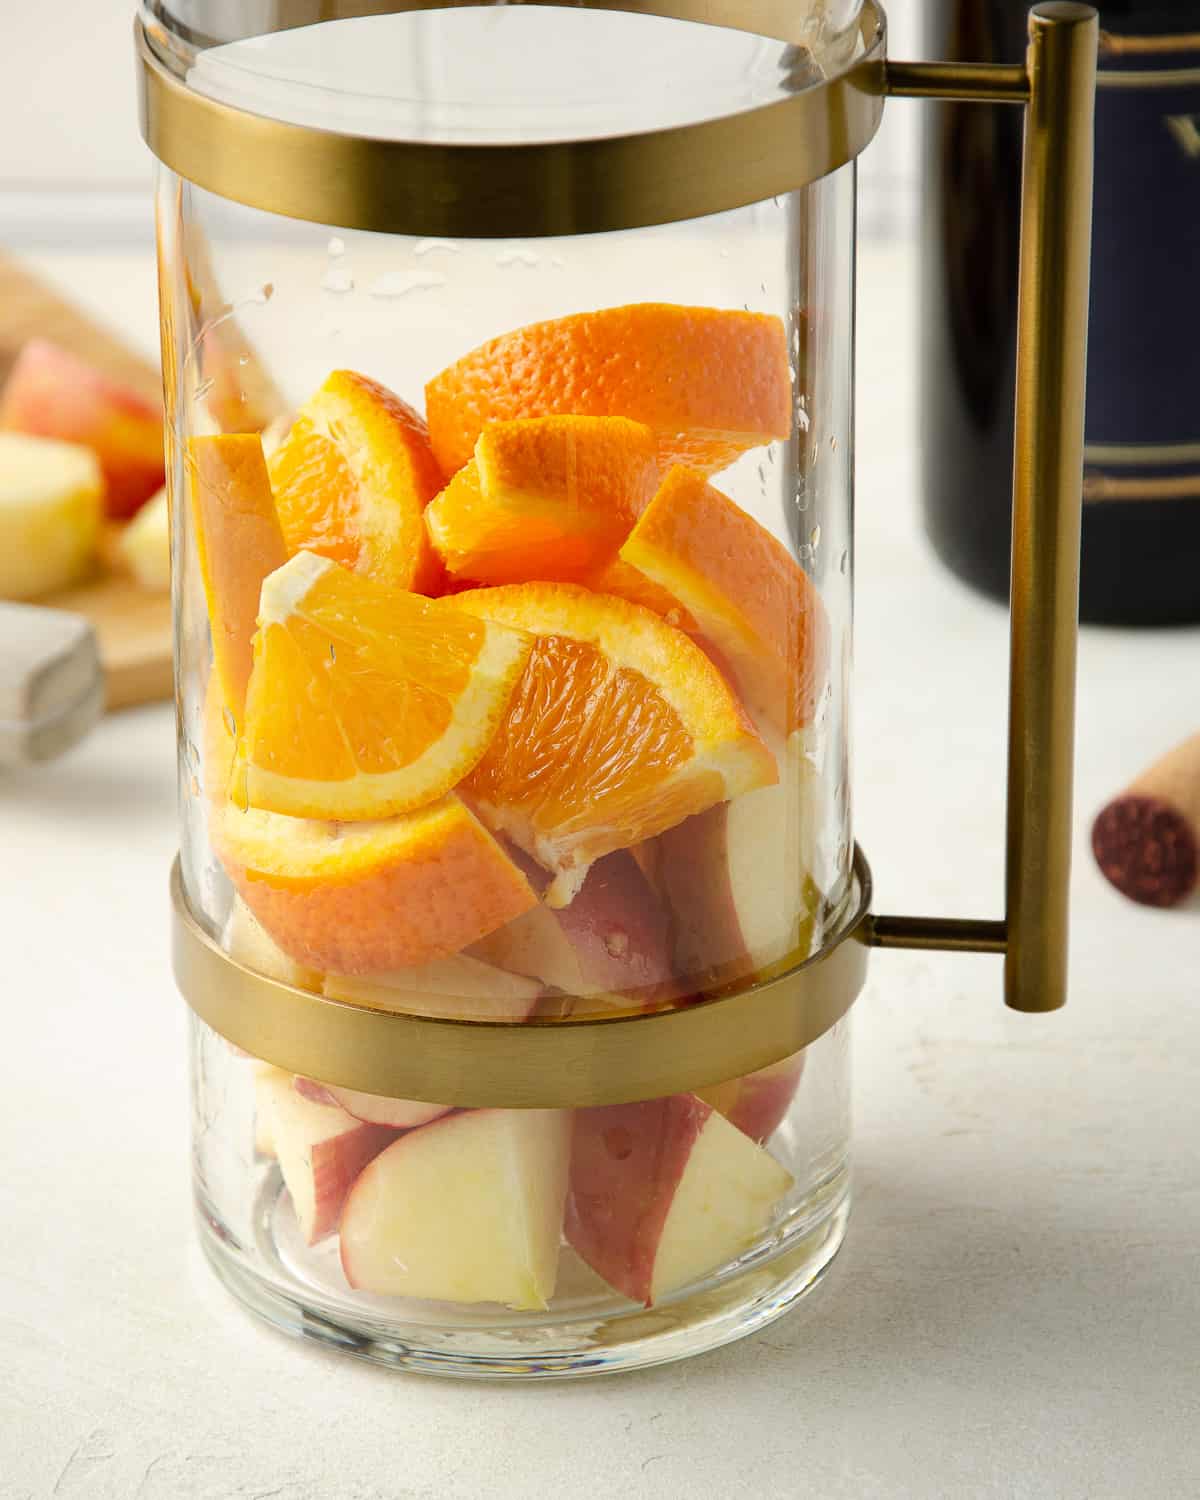 A pitcher filled with cut oranges and apples.